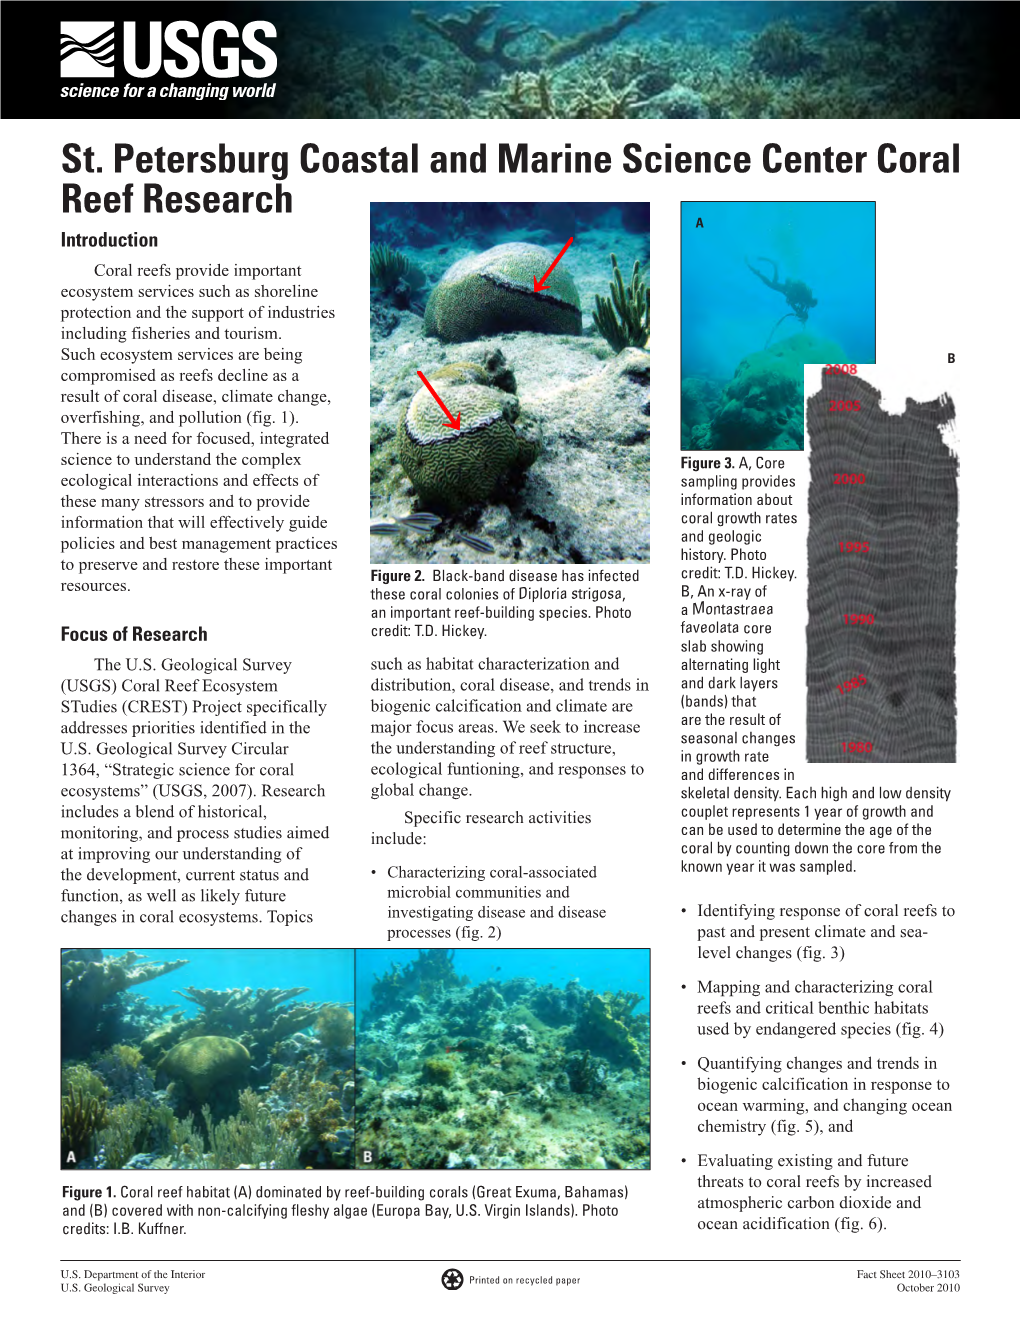 St. Petersburg Coastal and Marine Science Center Coral Reef Research